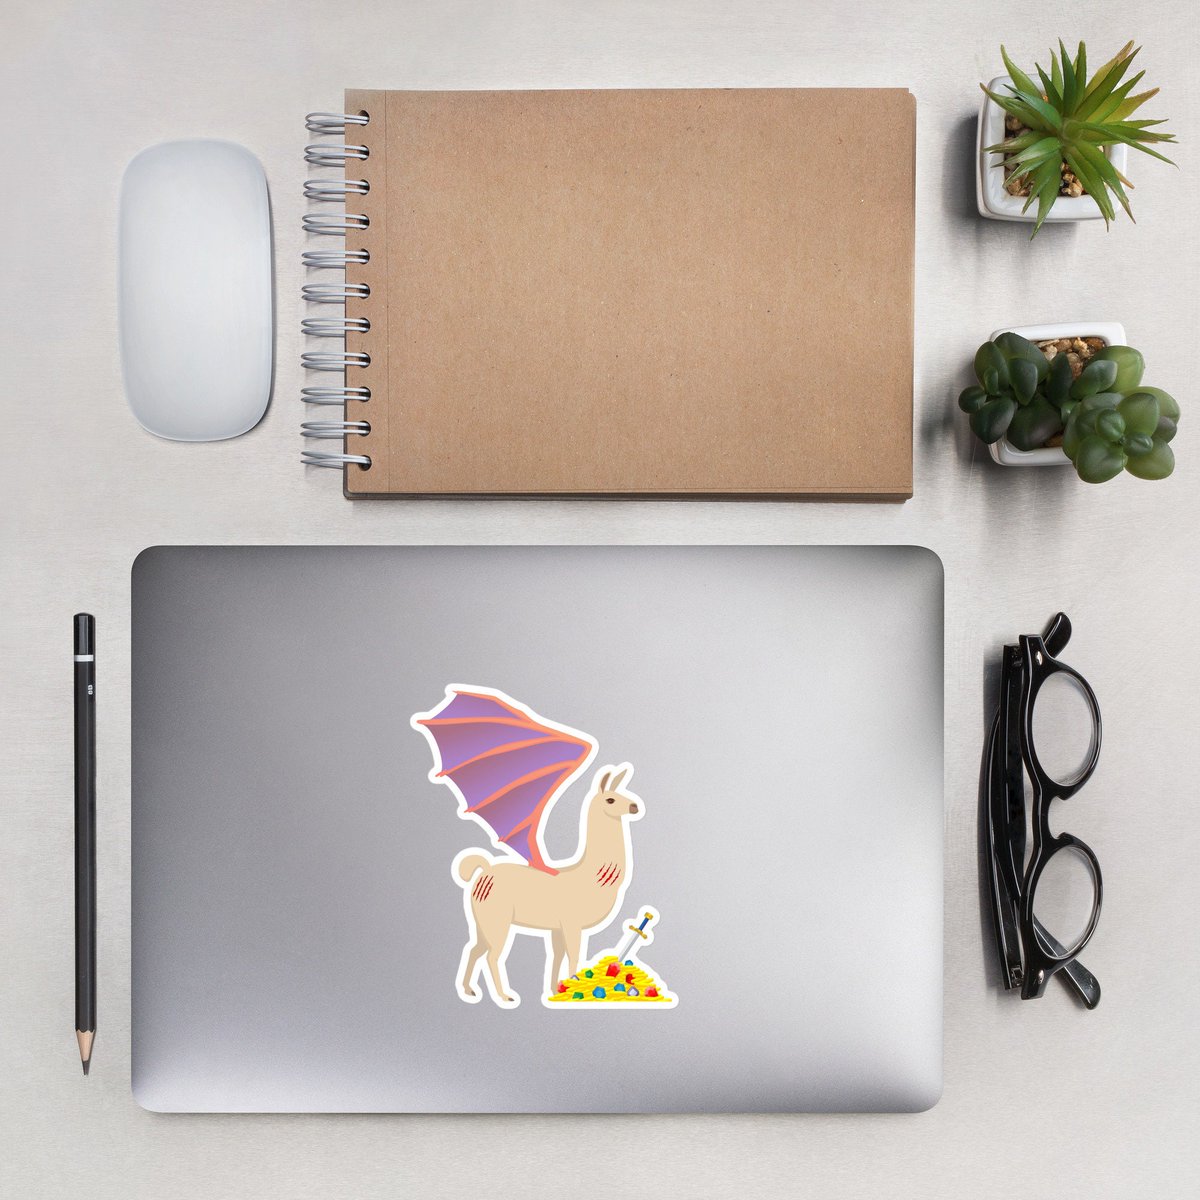 Excited to share the latest addition to my #etsy shop: Llama Dragon Bubble-free stickers, Vinyl Stickers, Llama stickers etsy.me/3Xv8Wiz #purple #kidscrafts #no #yellow #dragonllama #llamastickers #llamadecor #vinylstickers #scrapbooking